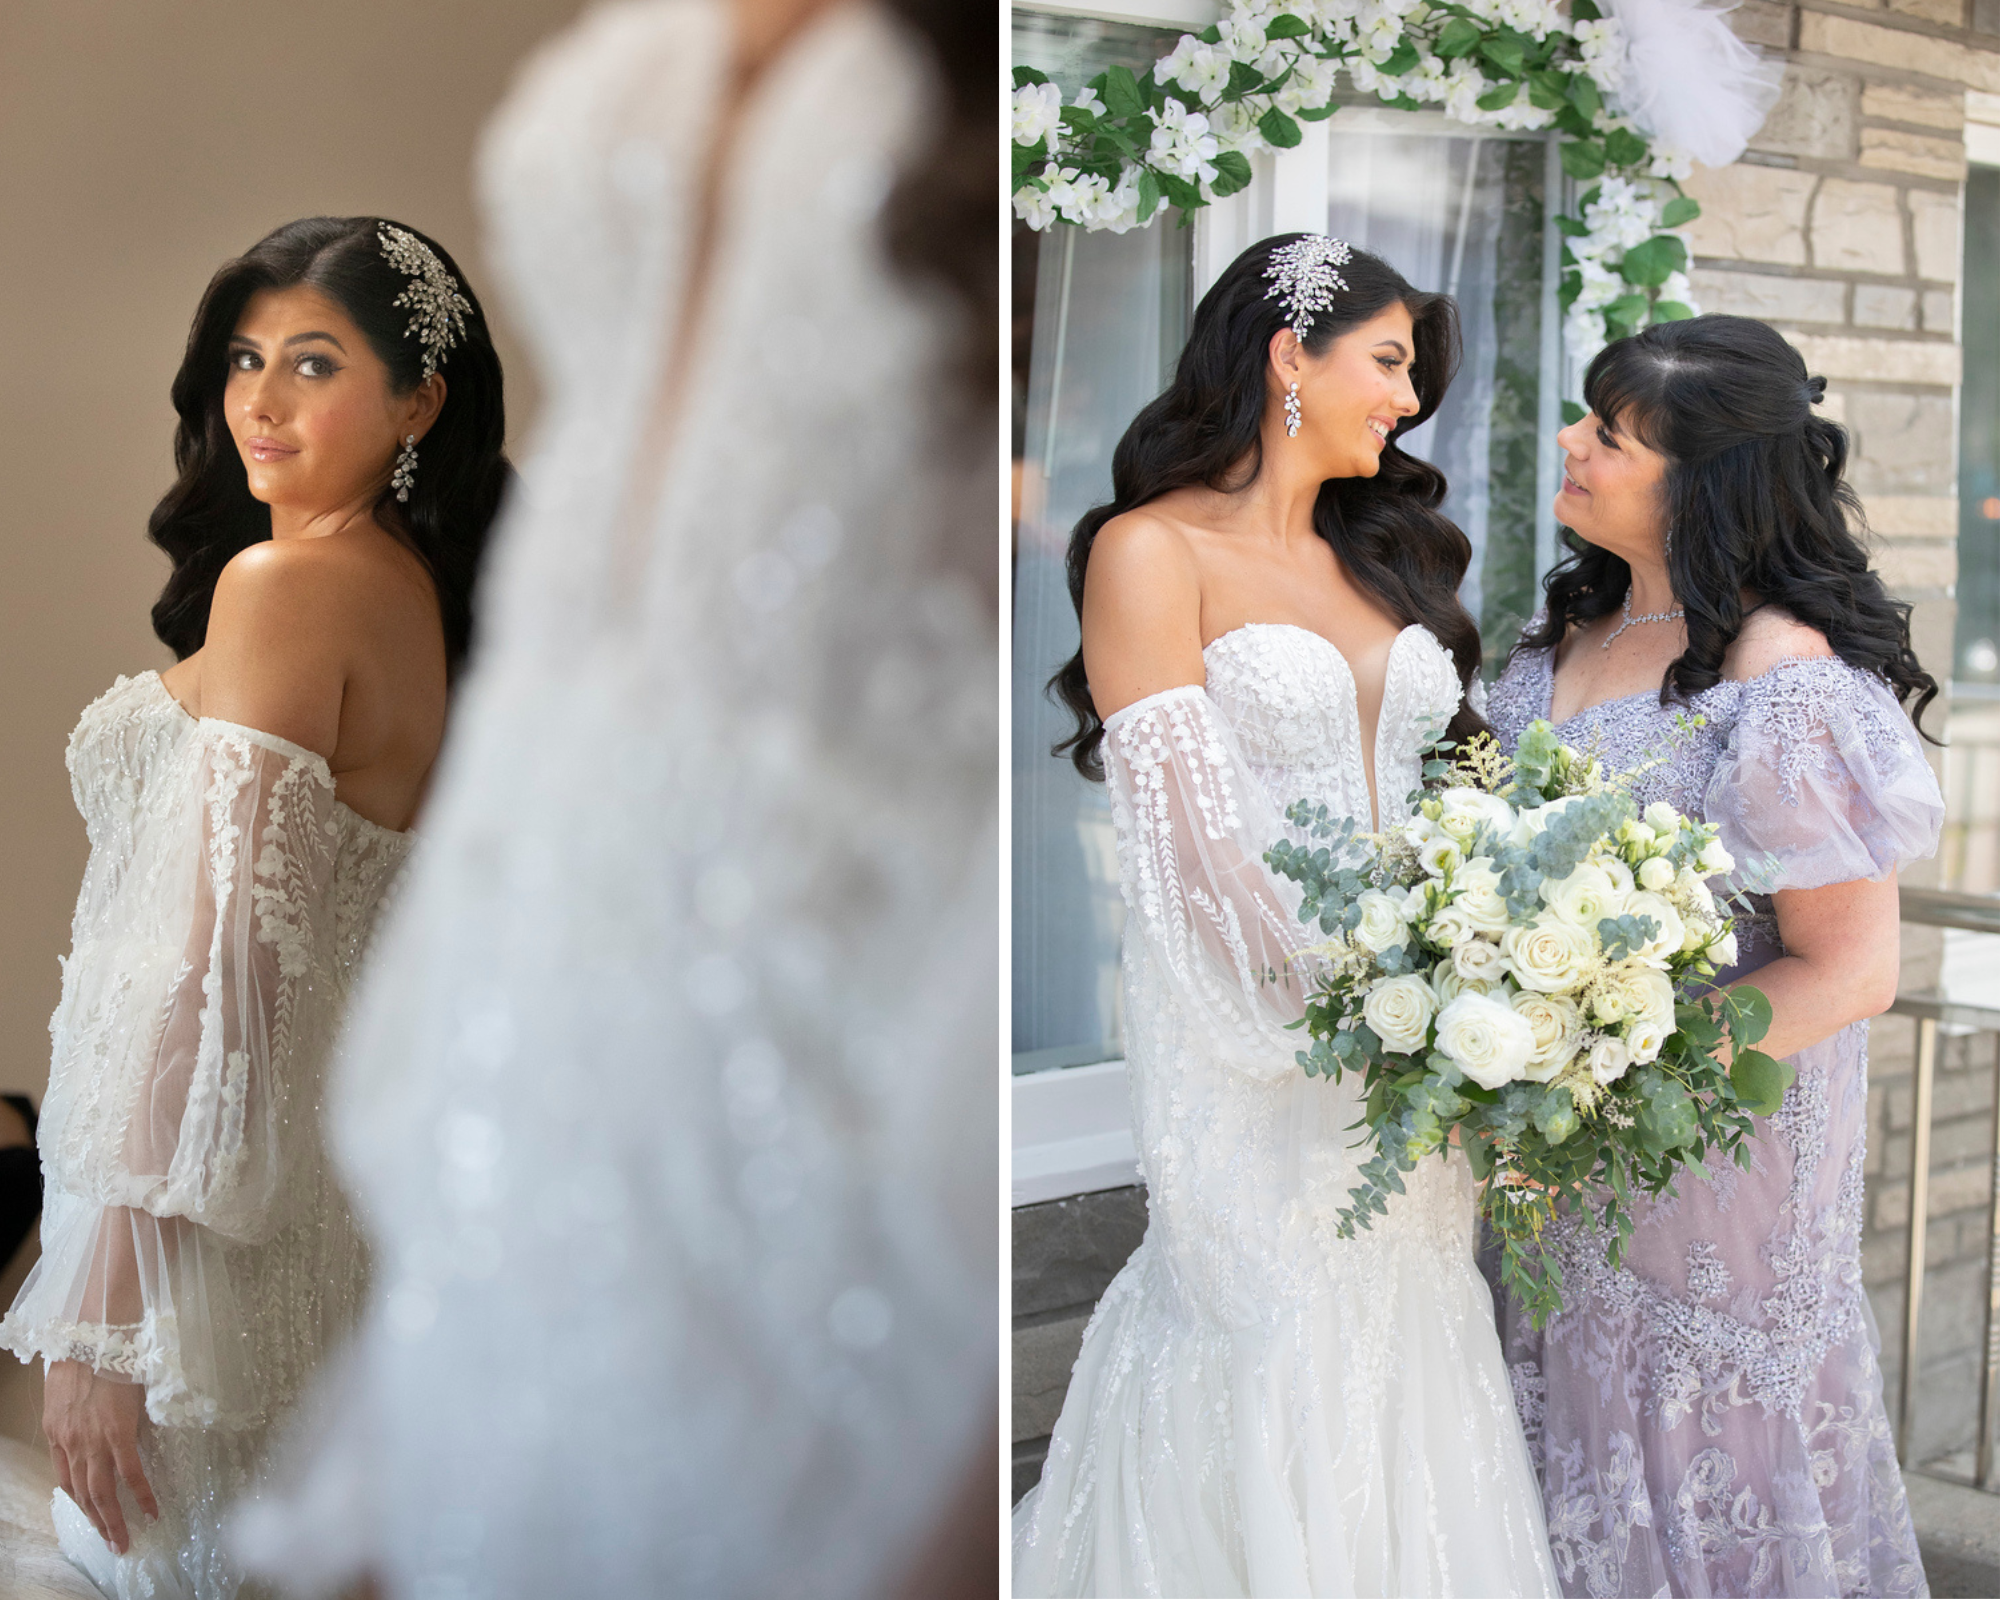 Beautiful bride Noelle wearing her stunning lace gown and Swarovski crystal bridal comb and jewelry.